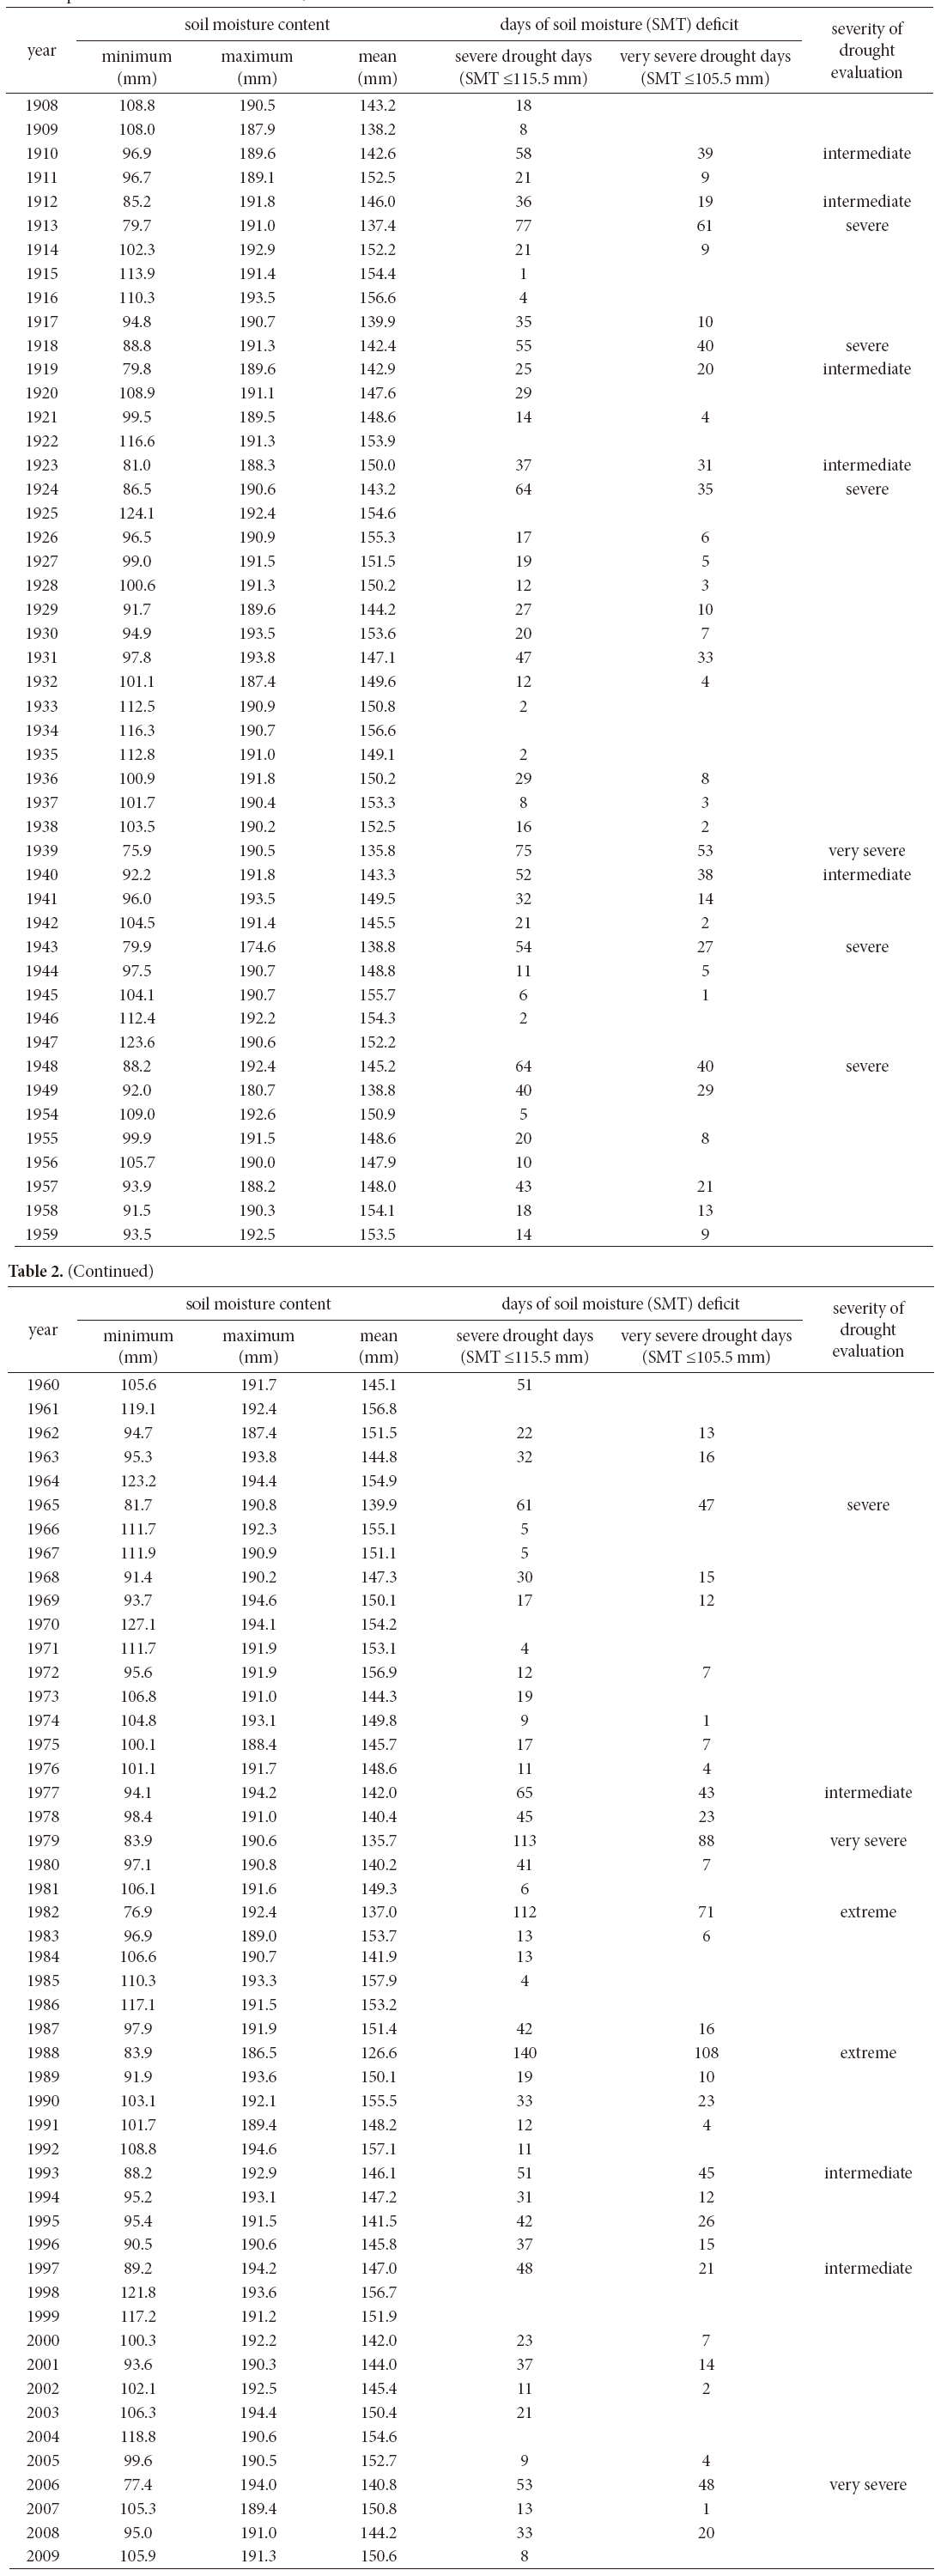 Soil moisture content statistics for each year, reconstructed drought events, and the severity evaluation of drought during theperiod from 1908 to 2009 in Seoul, Korea